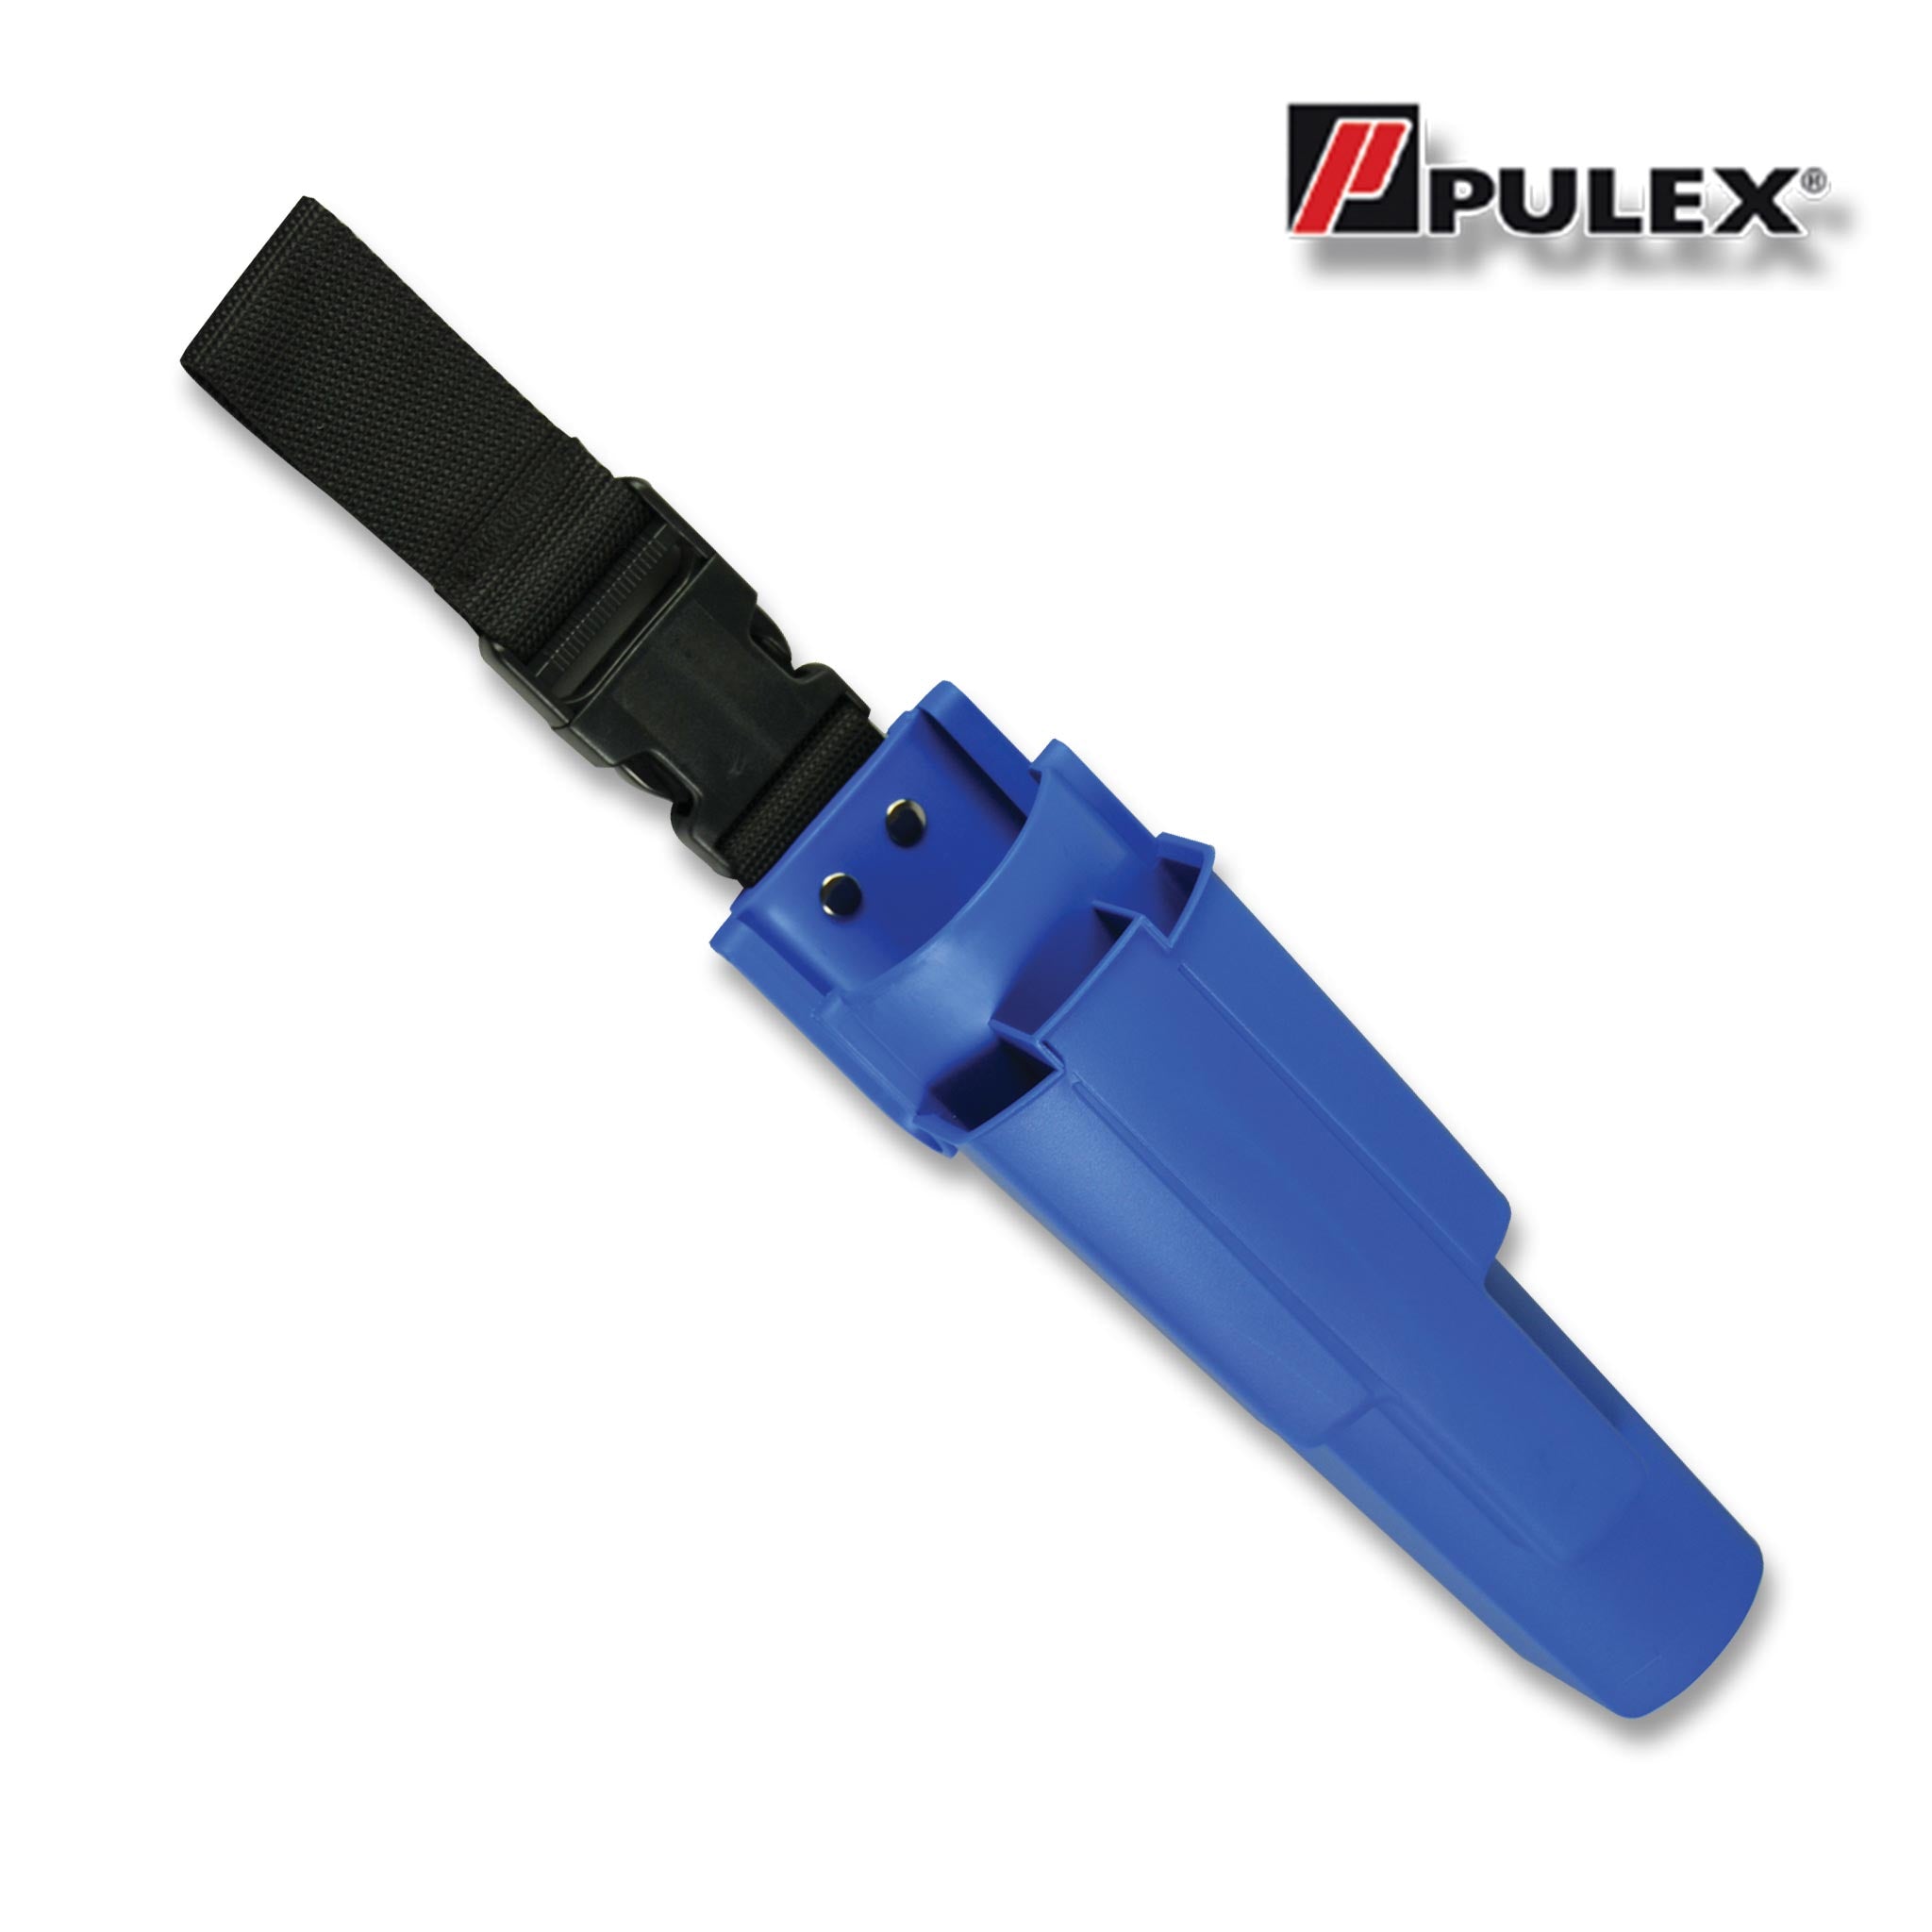 Pulex Tubex Tool Holder: Holds 3 Squeegees & Washer